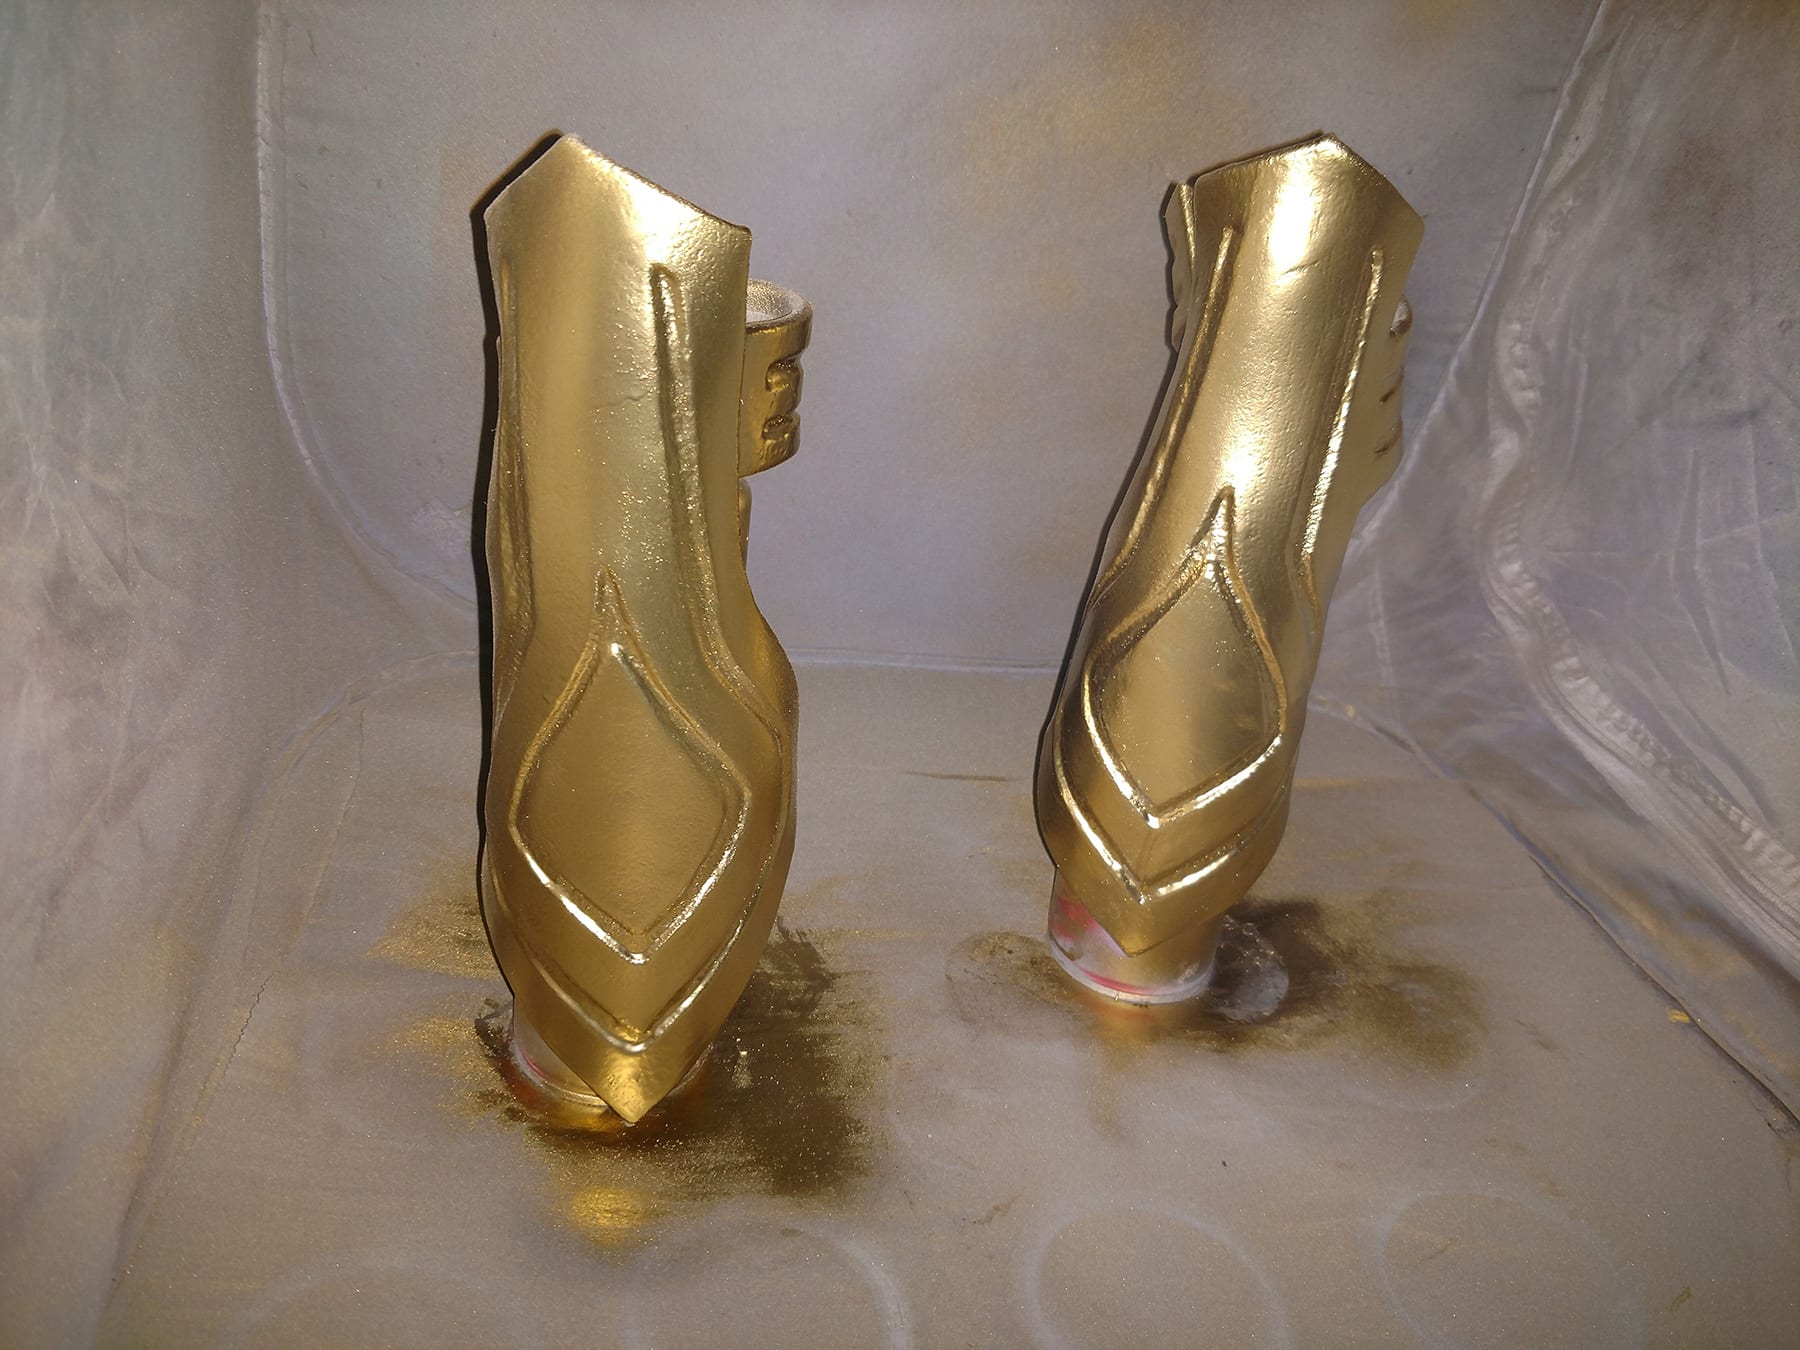 A pair of shiny gold cosplay Hela bracers are shown against a grey backdrop that has gold spray paint on it.